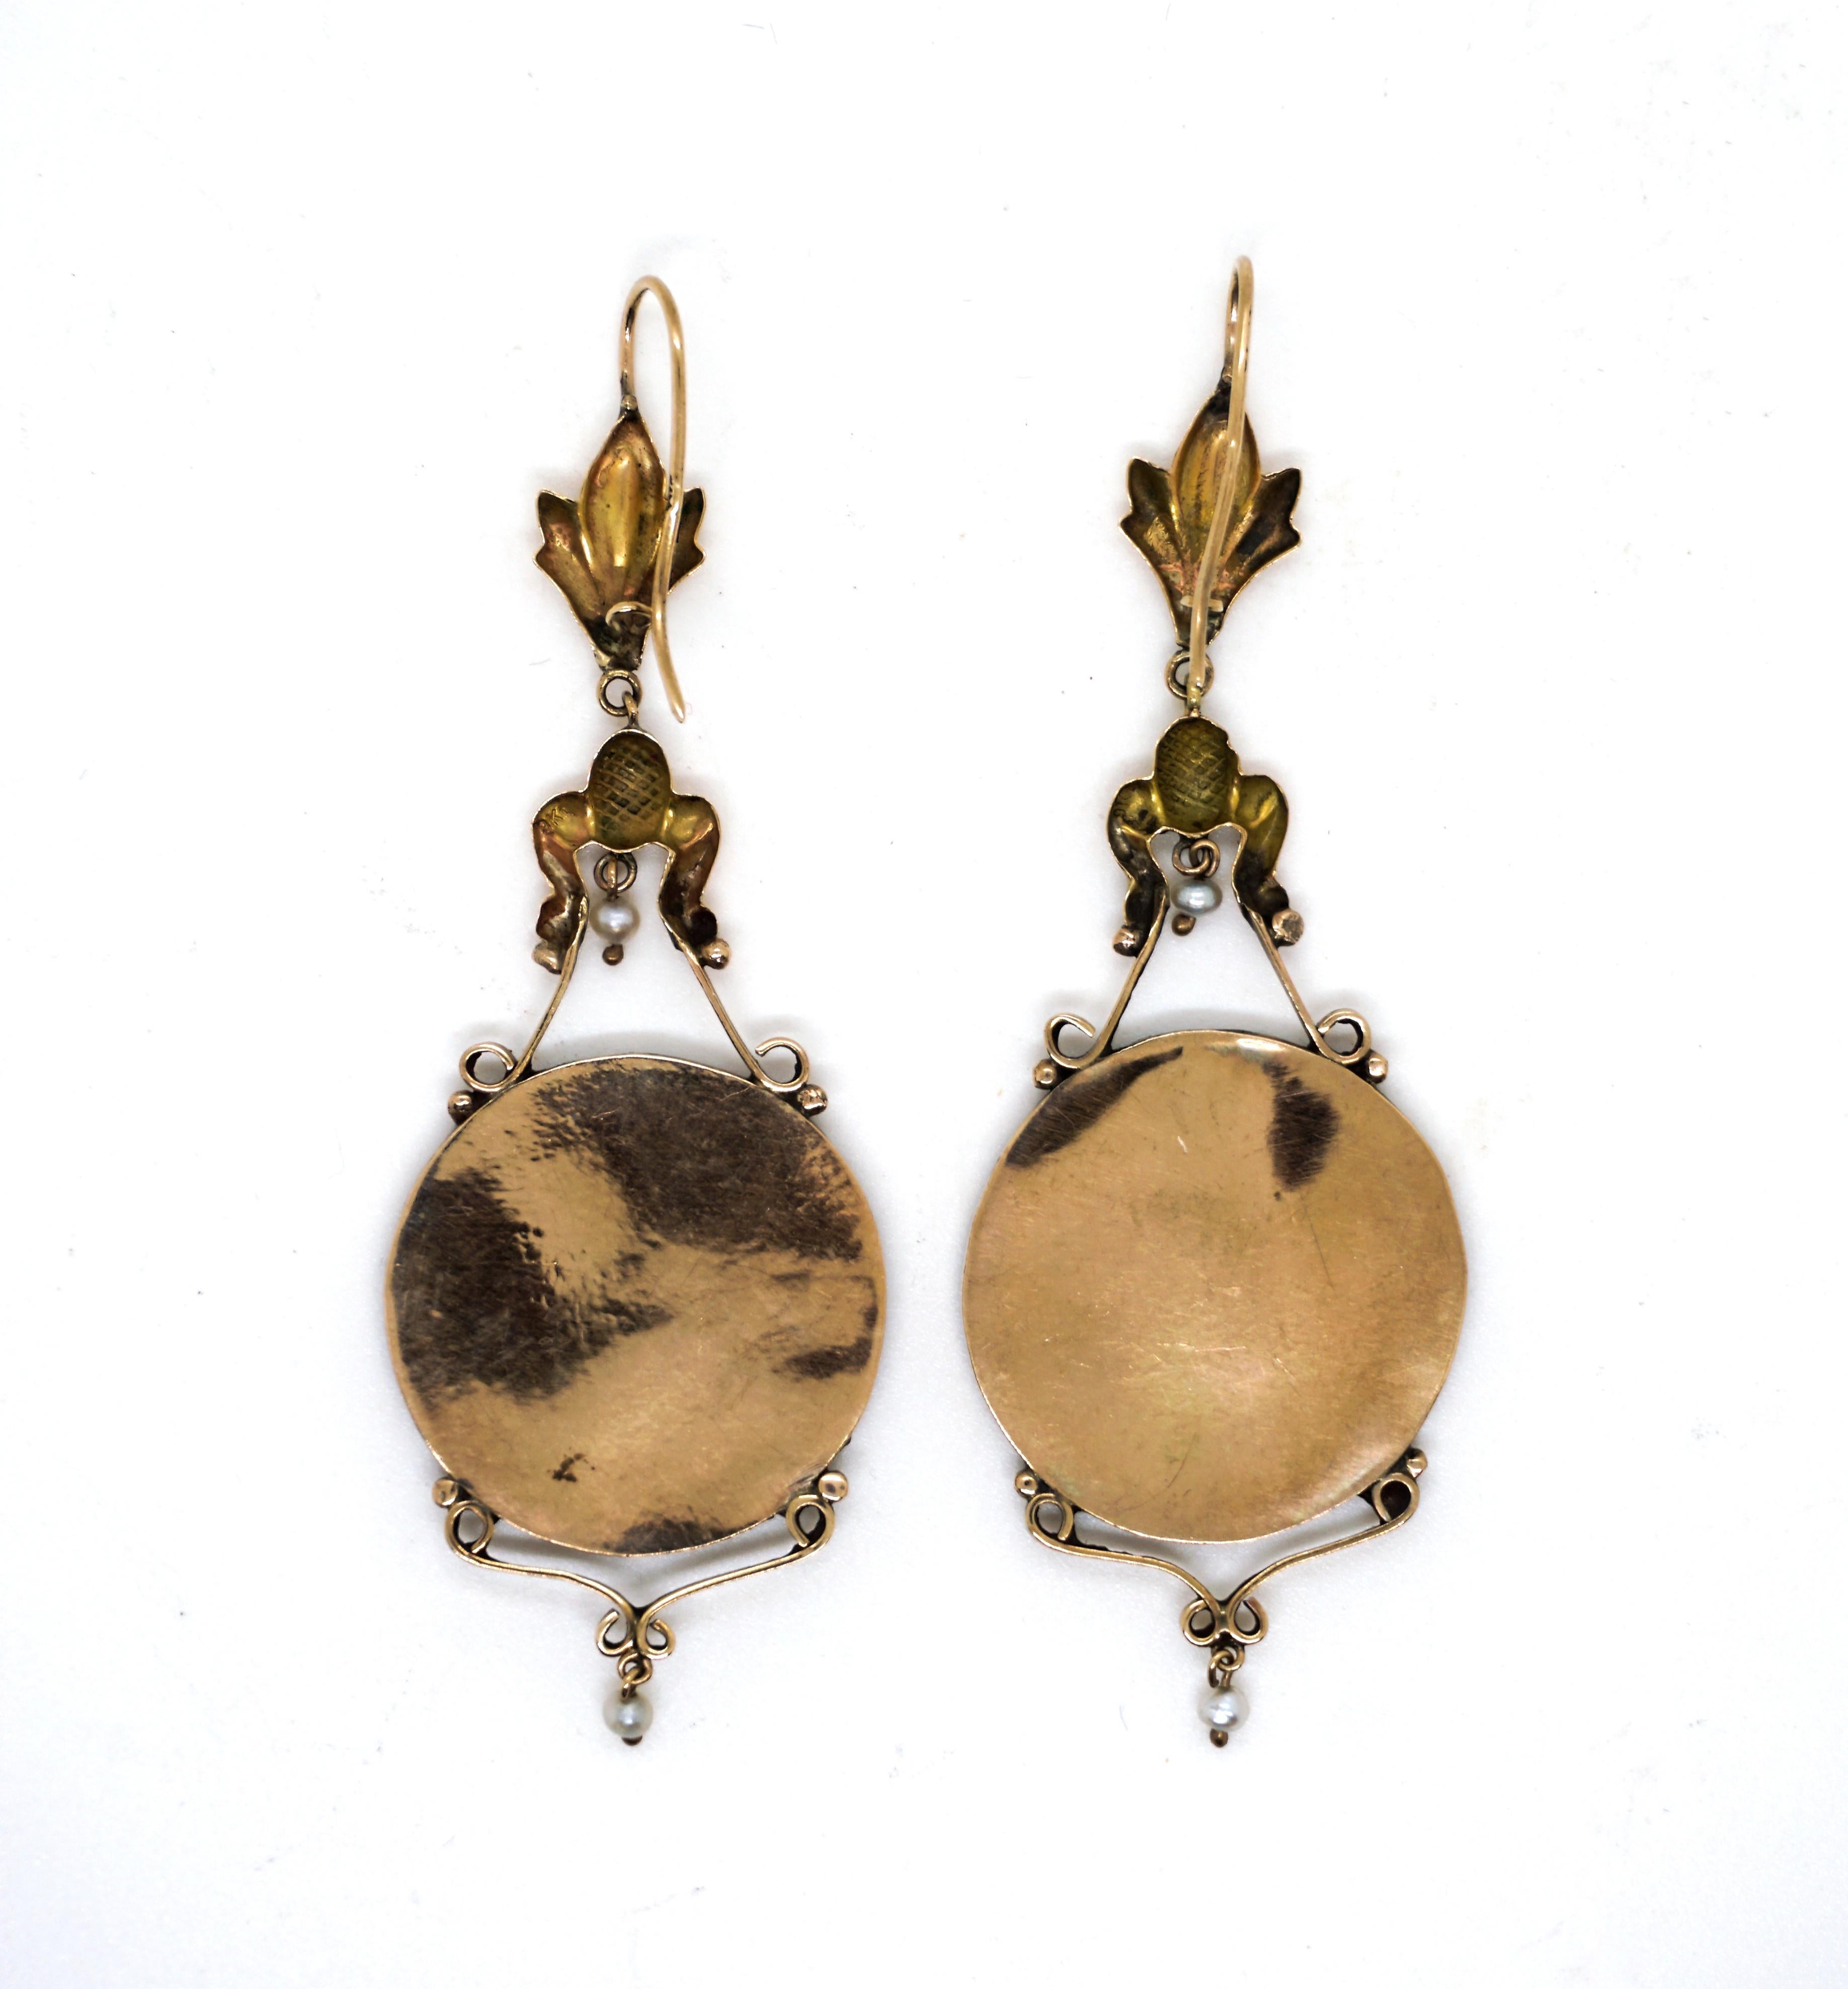 Pair of delicate rose gold earrings with movable drop-shaped pendant, decorated with stylized flowers and leaves, as well as movably suspended seed pearls, medallion with enamel painted motif, probably Italian

Made circa 1890

Dimensions:
total